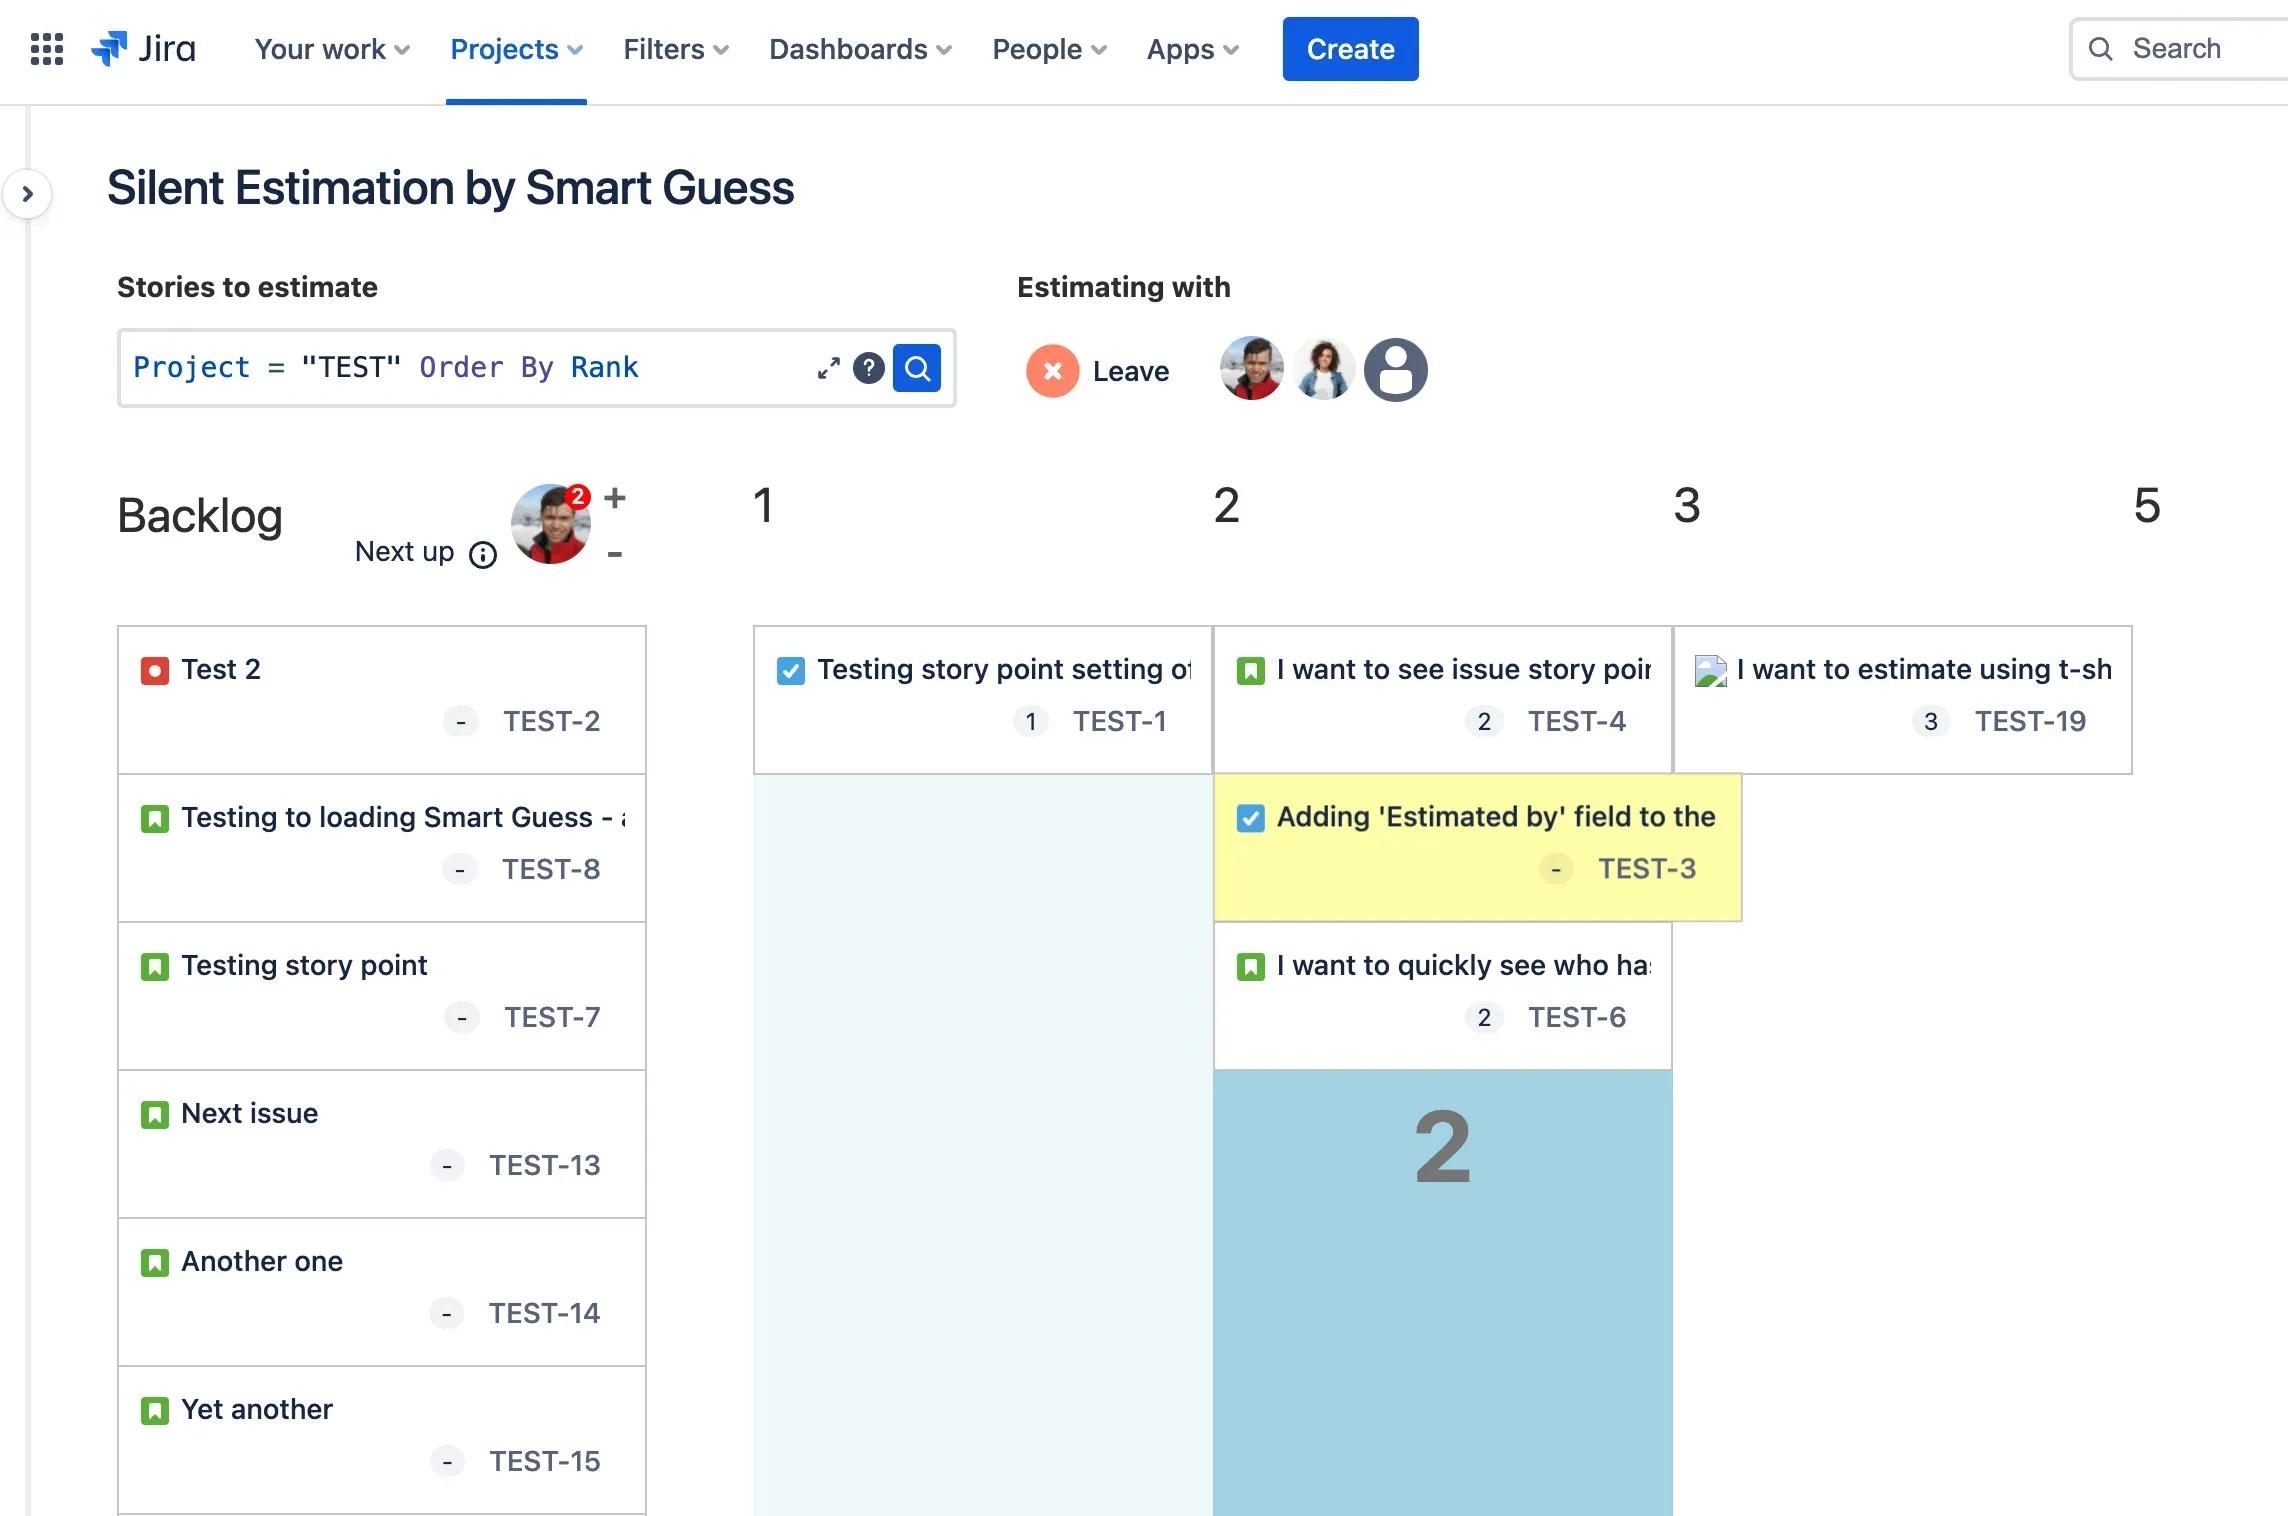 Silent Estimation by Smart Guess allows teams to estimate large number of stories faster